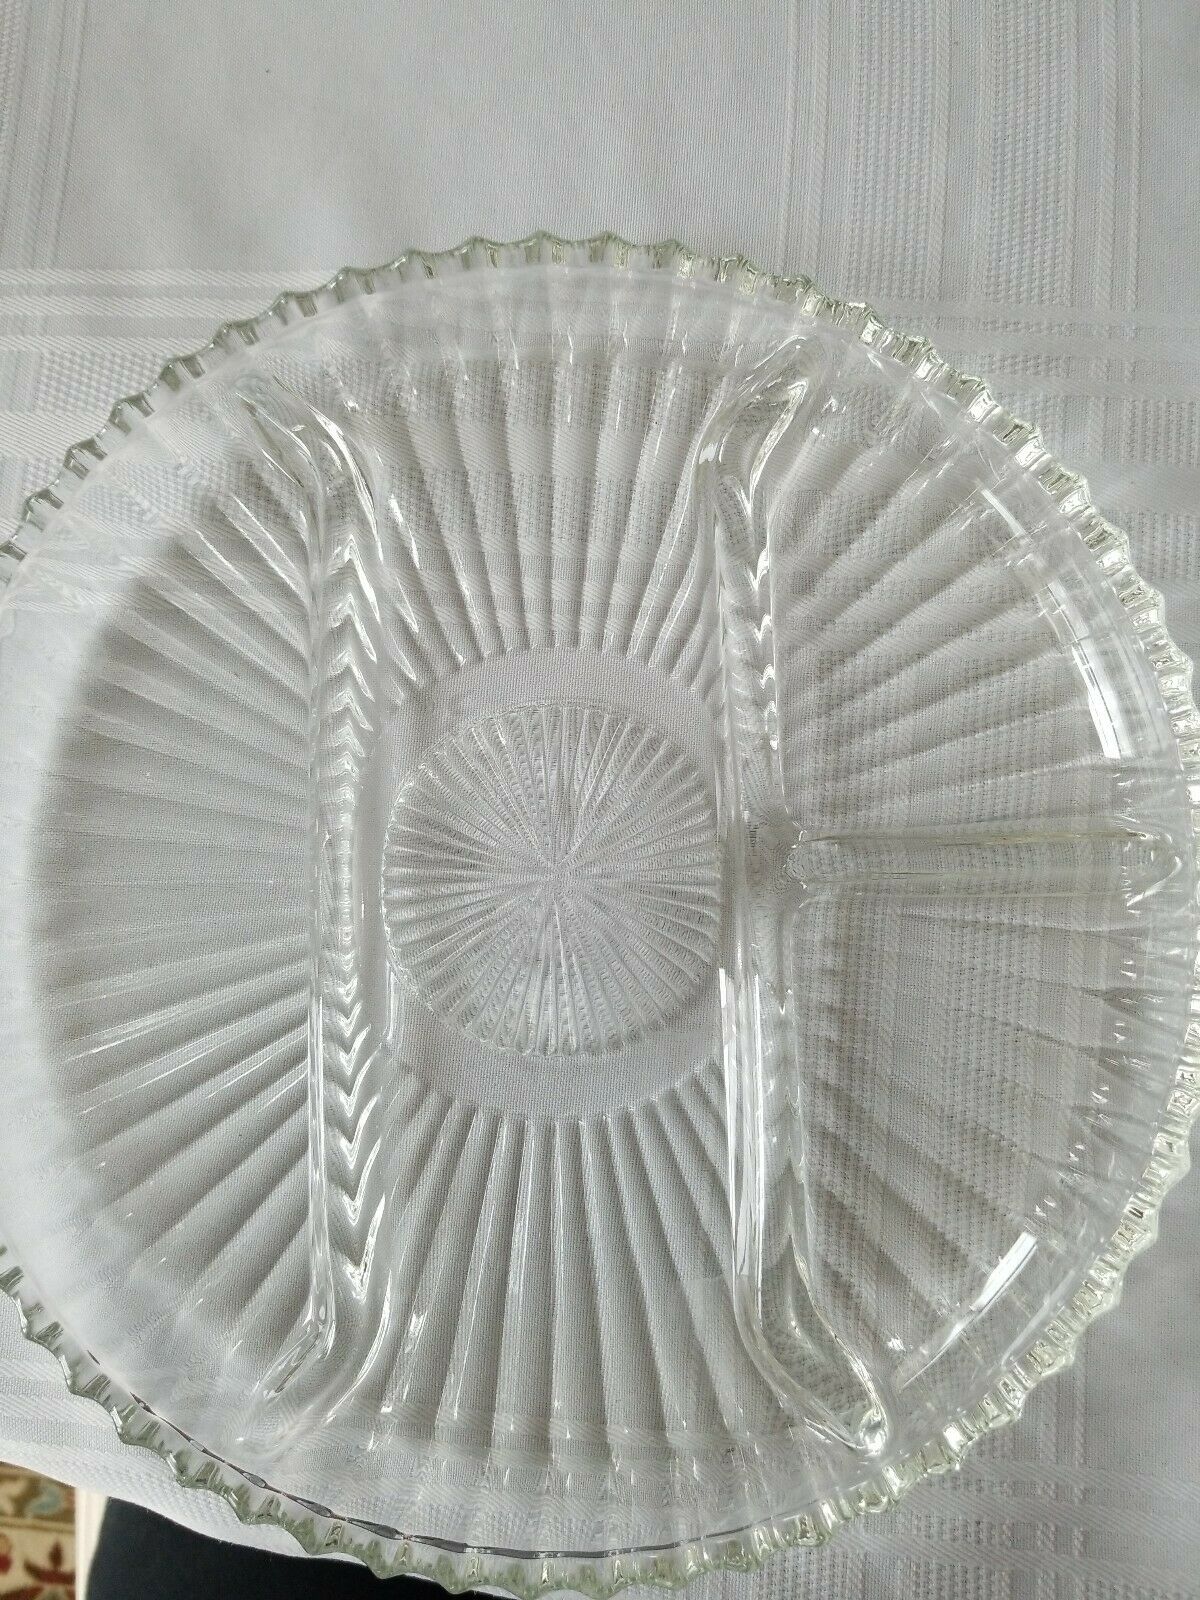 Anchor Hocking Clear Depression Glass, Queen Mary Pattern. Circa 1936-1949.